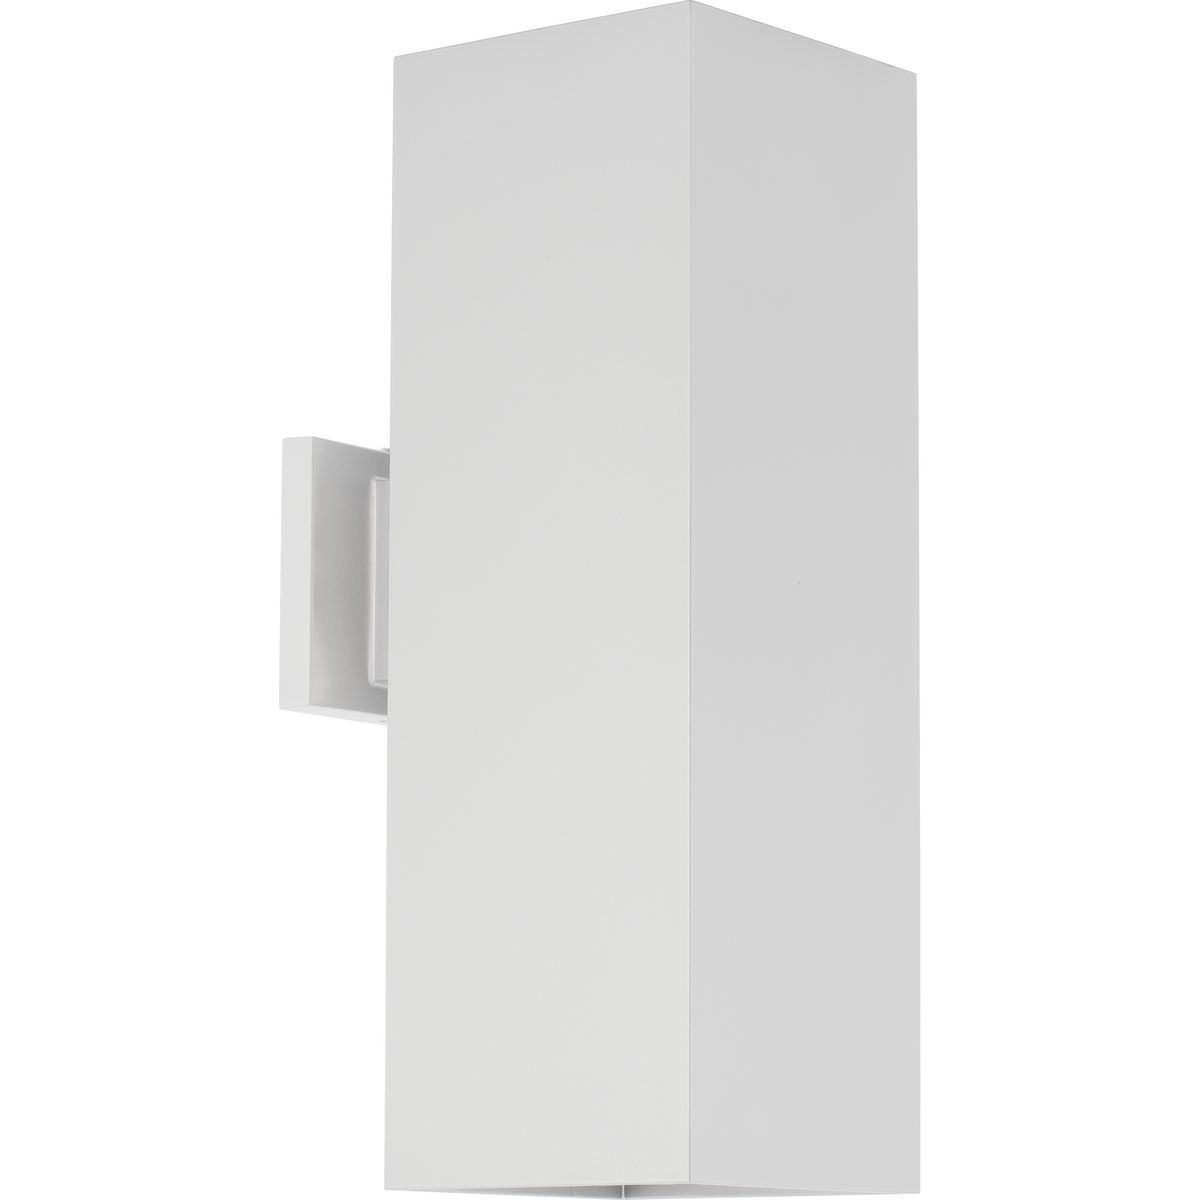 6" LED Square Up/Down Outdoor Wall Mount Fixture - Damp Location Listed - Model P5644-30-30K